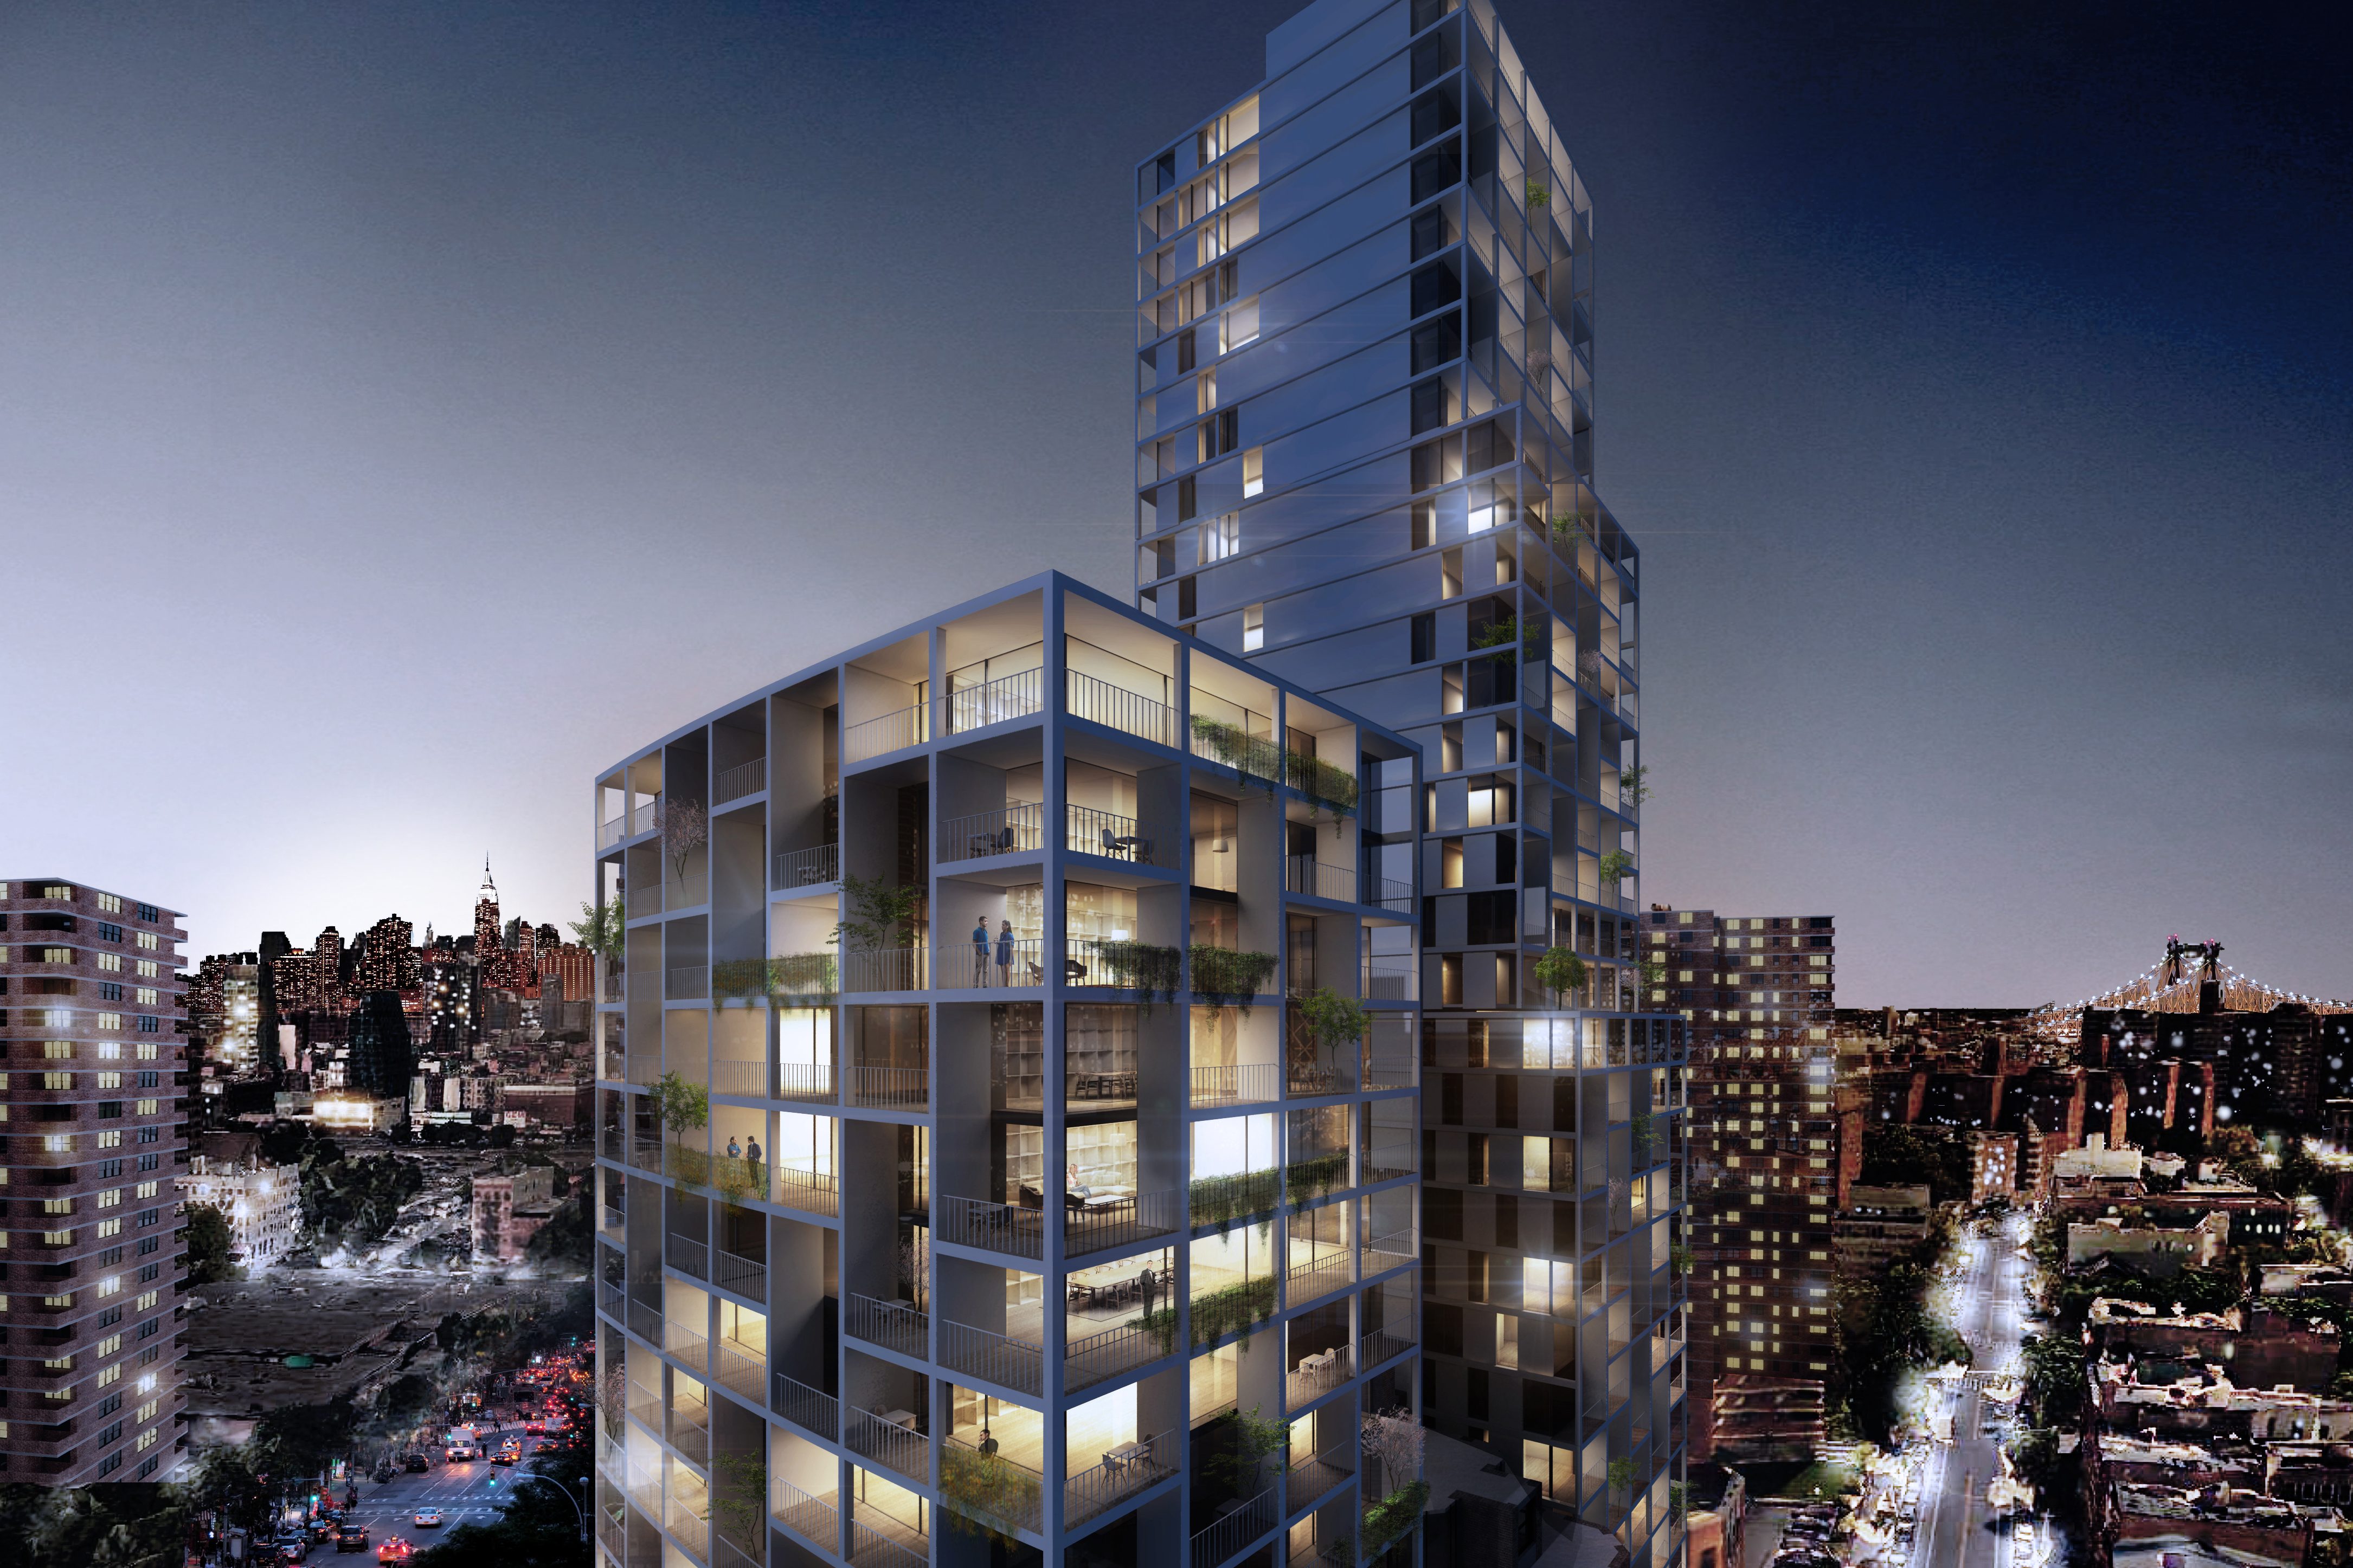 226-232 East Broadway, rendering by S4 Architecture